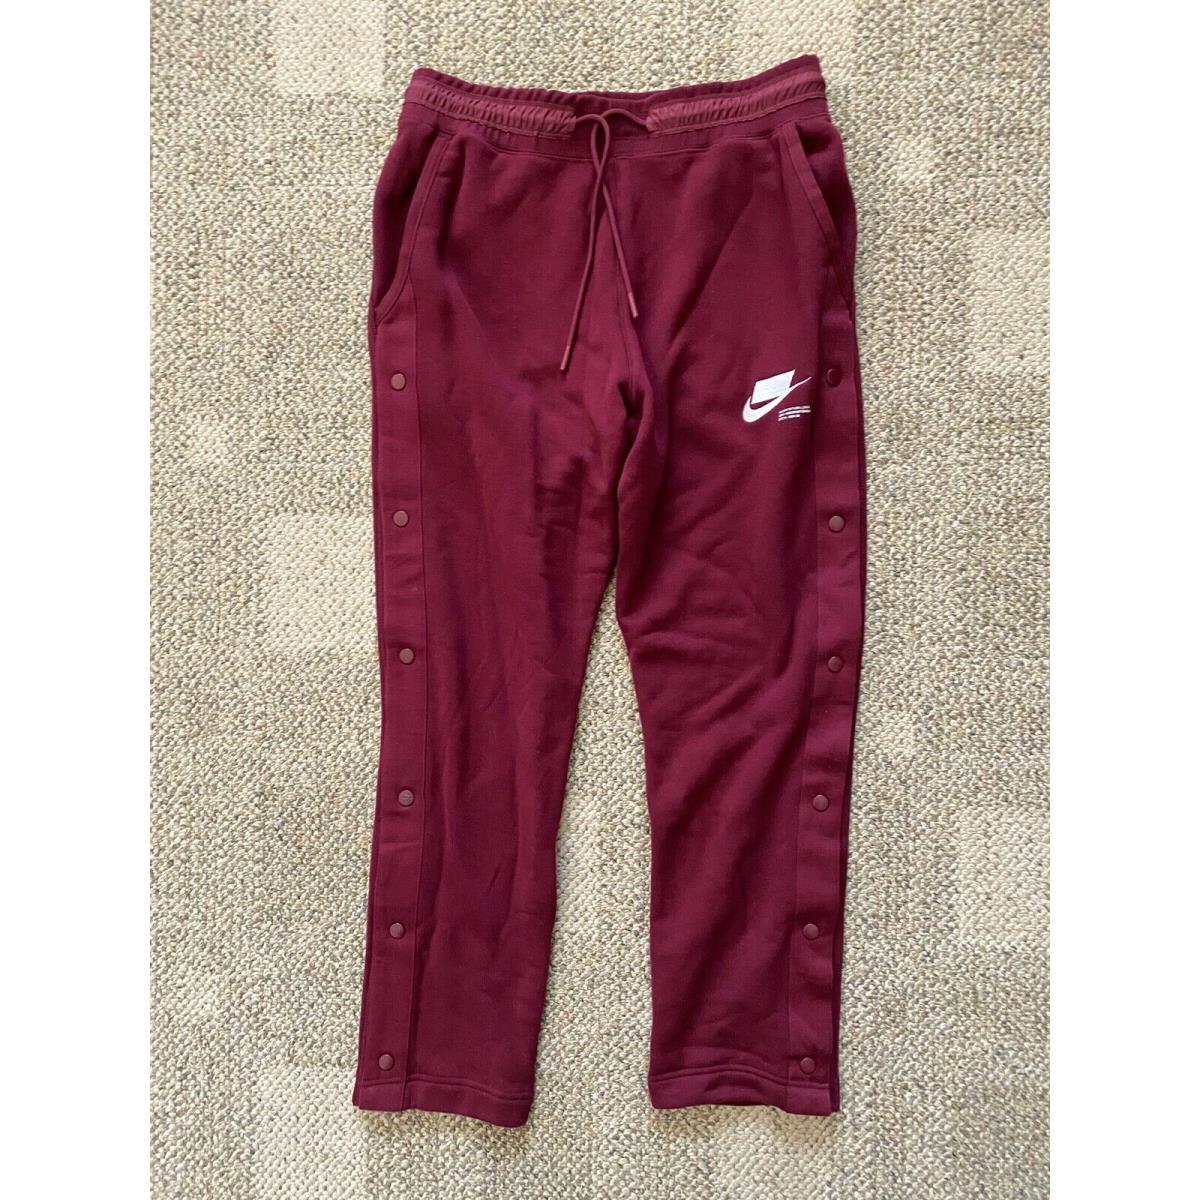 Mens L Large Nike Sportswear Nsw French Terry Sweat Athletic Pants CU3820-638